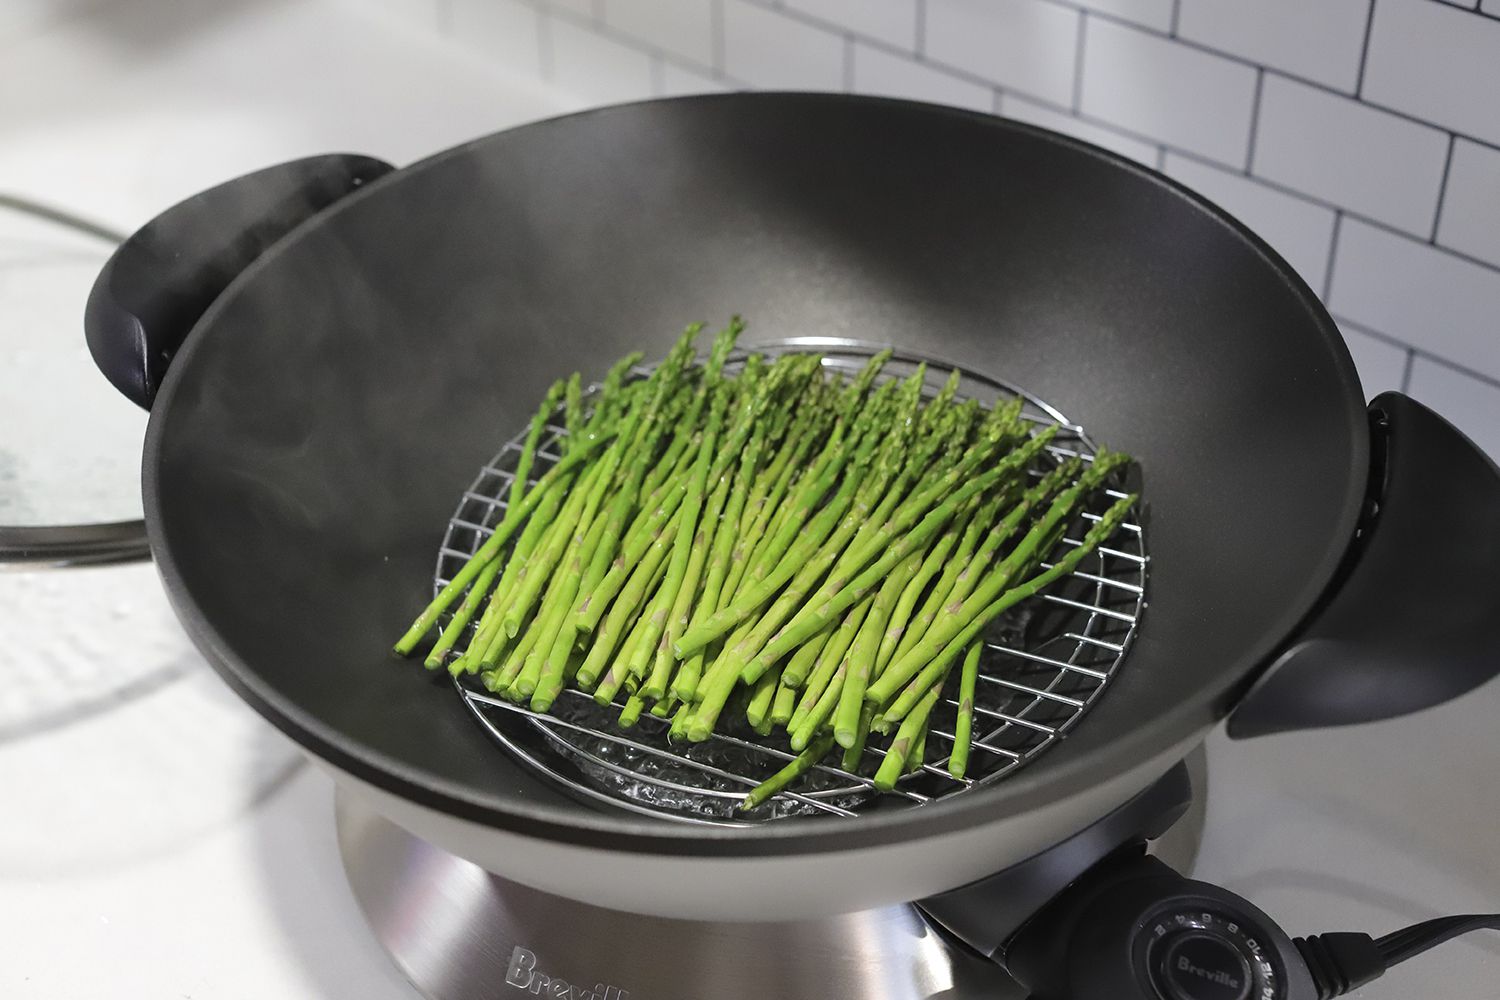 A Breville Hot Wok Pro displayed on a countertop with asparagus in it